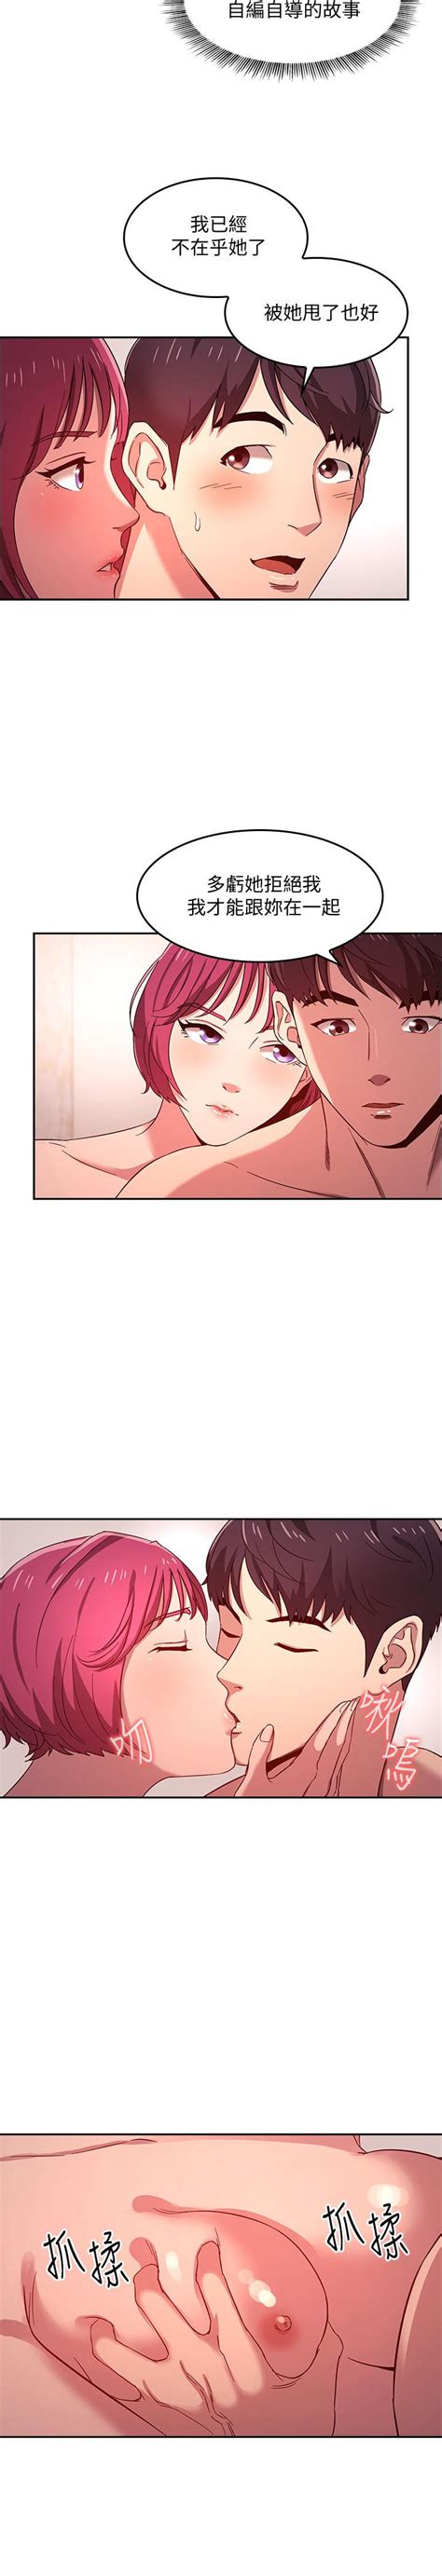 Sorry for the popup bothering readers. Read Manhwa, manga online, manhwa engsub, manhwa mobile